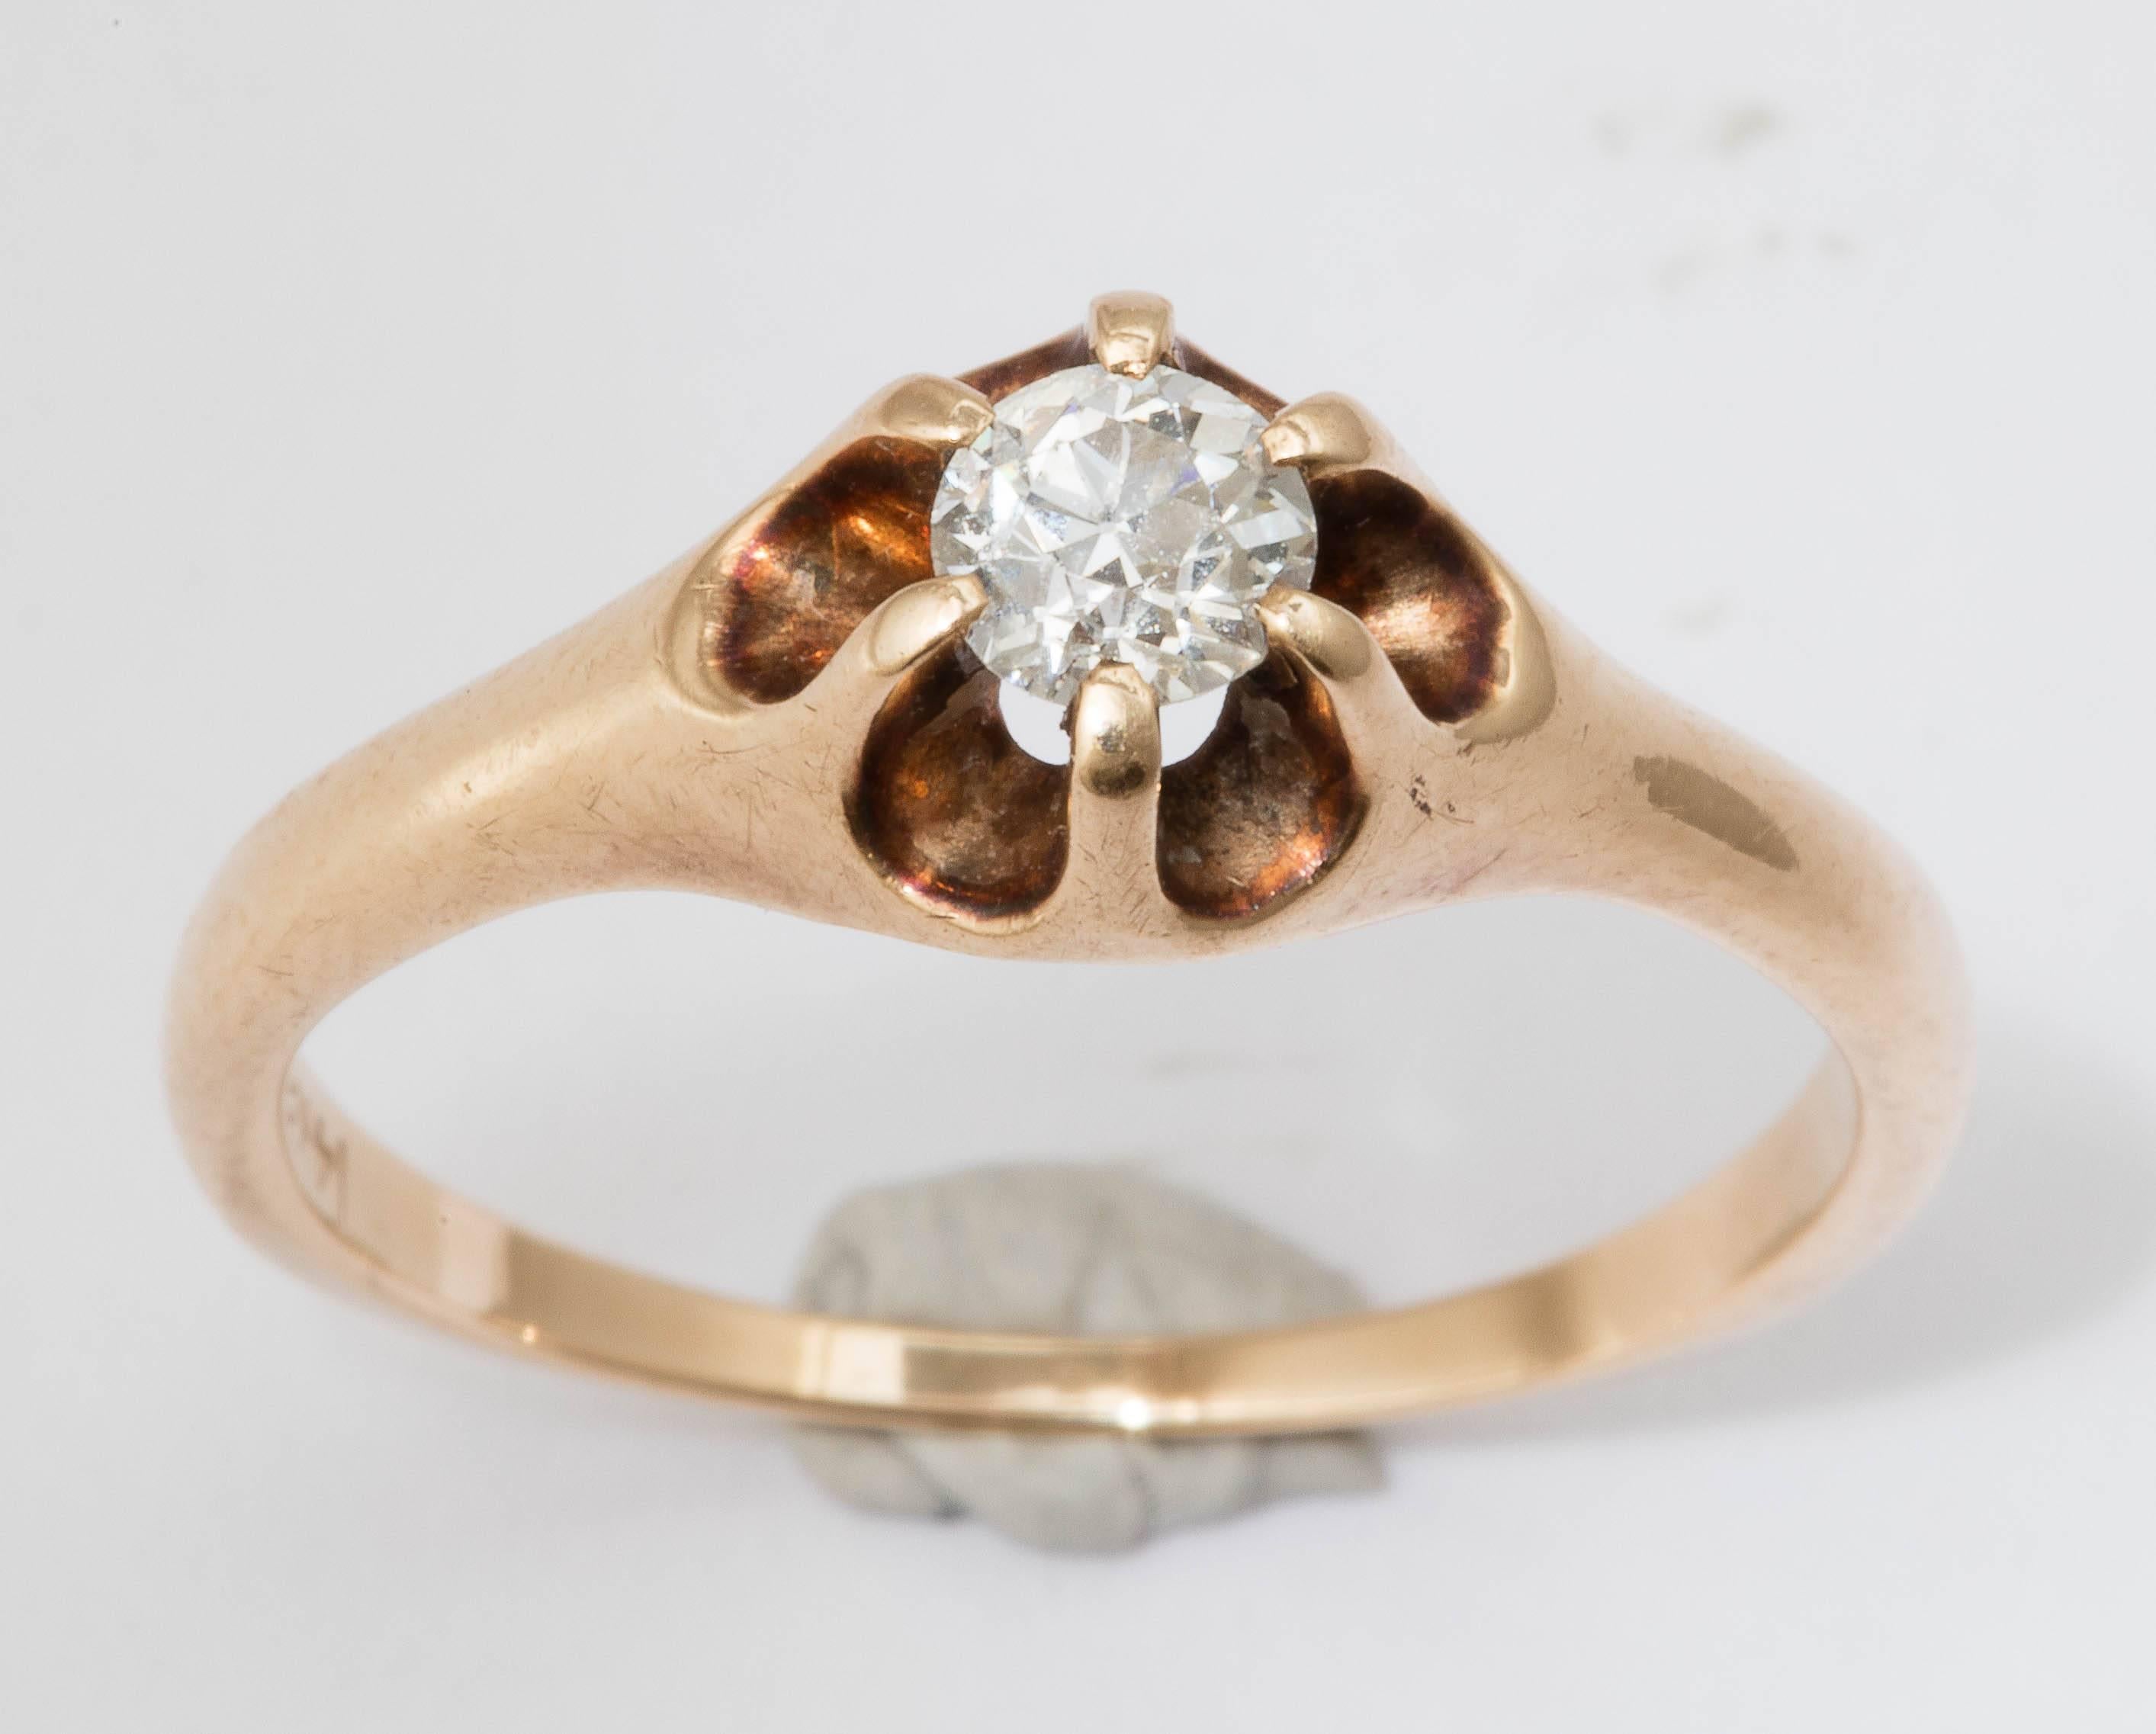 Lovely c.1900 14K yellow gold ring with a belcher set Old European cut diamond. The diamond weighs approximately .30cts. A classic style of this period for American jewelry. 